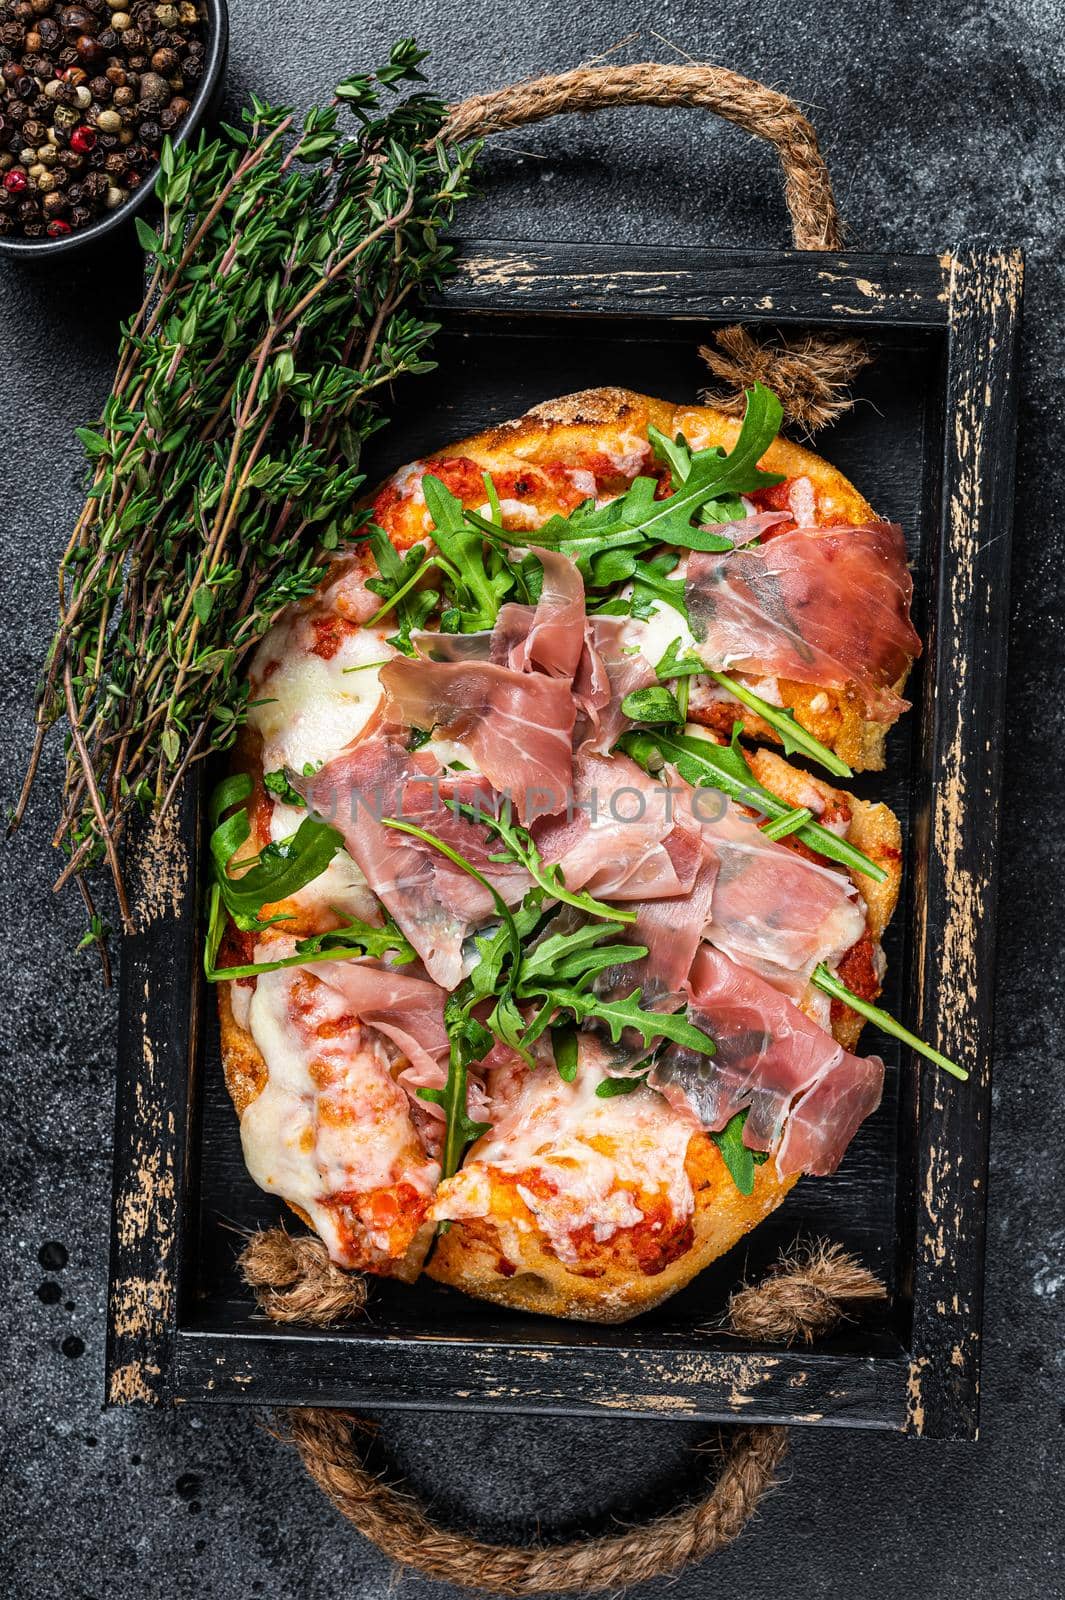 Italian Pizza with prosciutto parma ham, arugula salad and cheese in a rustic wooden tray. Black background. Top view by Composter